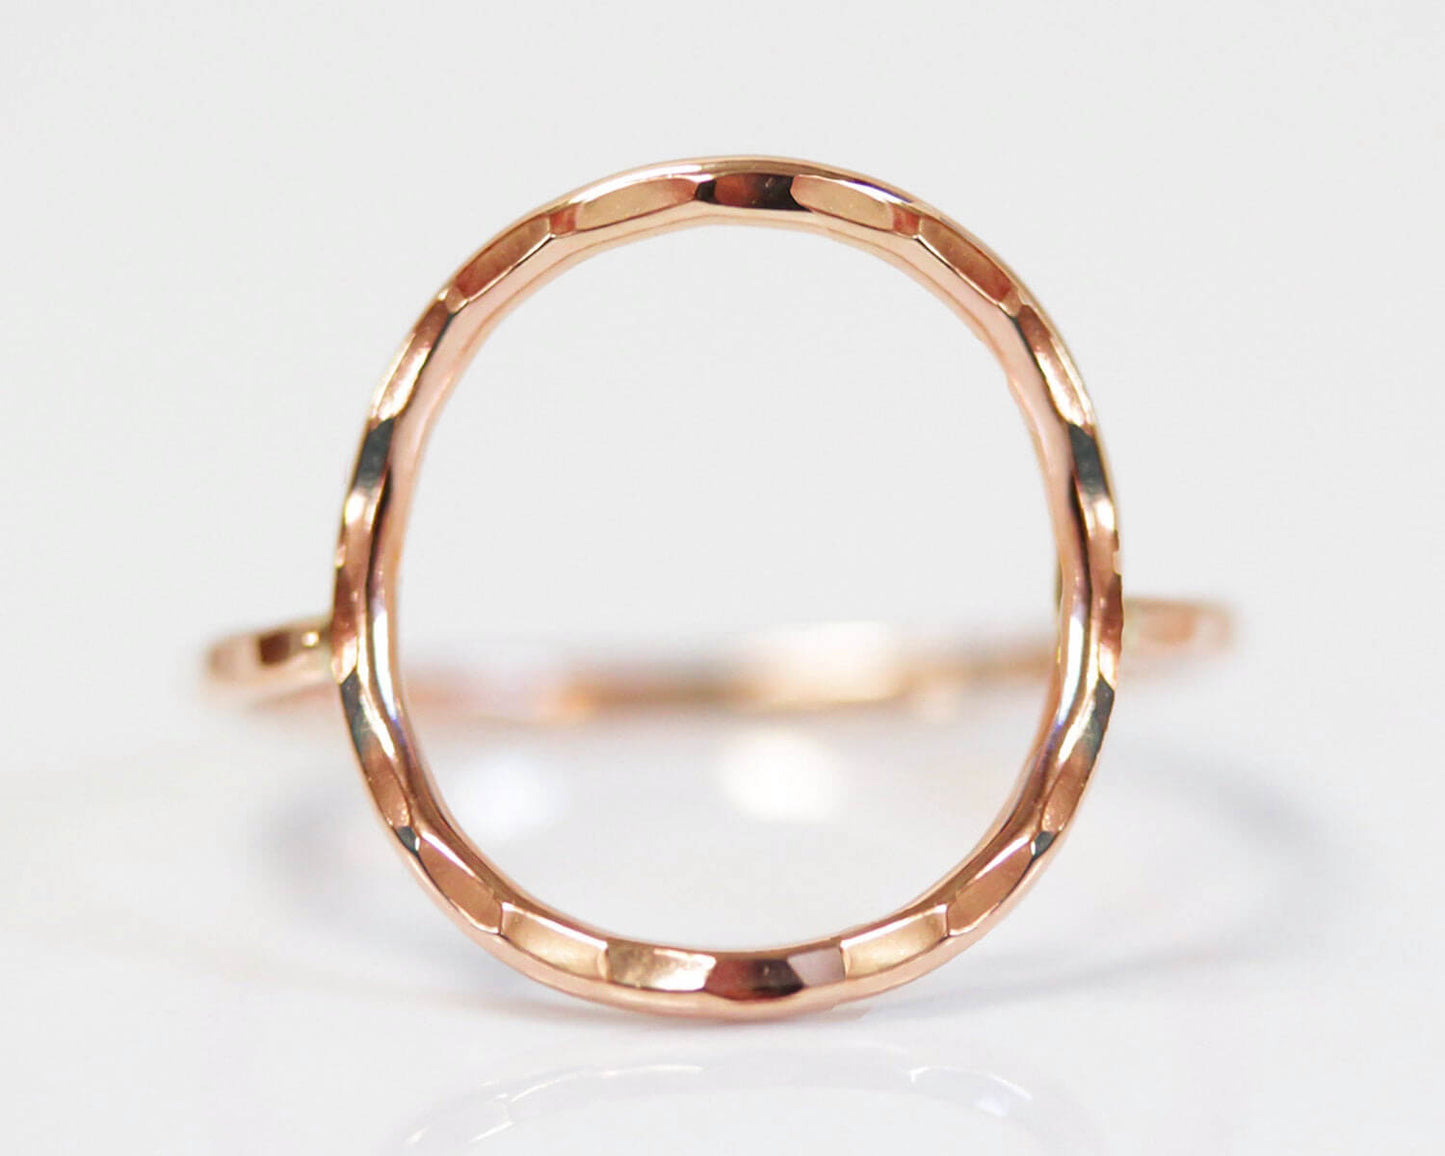 The Simple Circle Ring